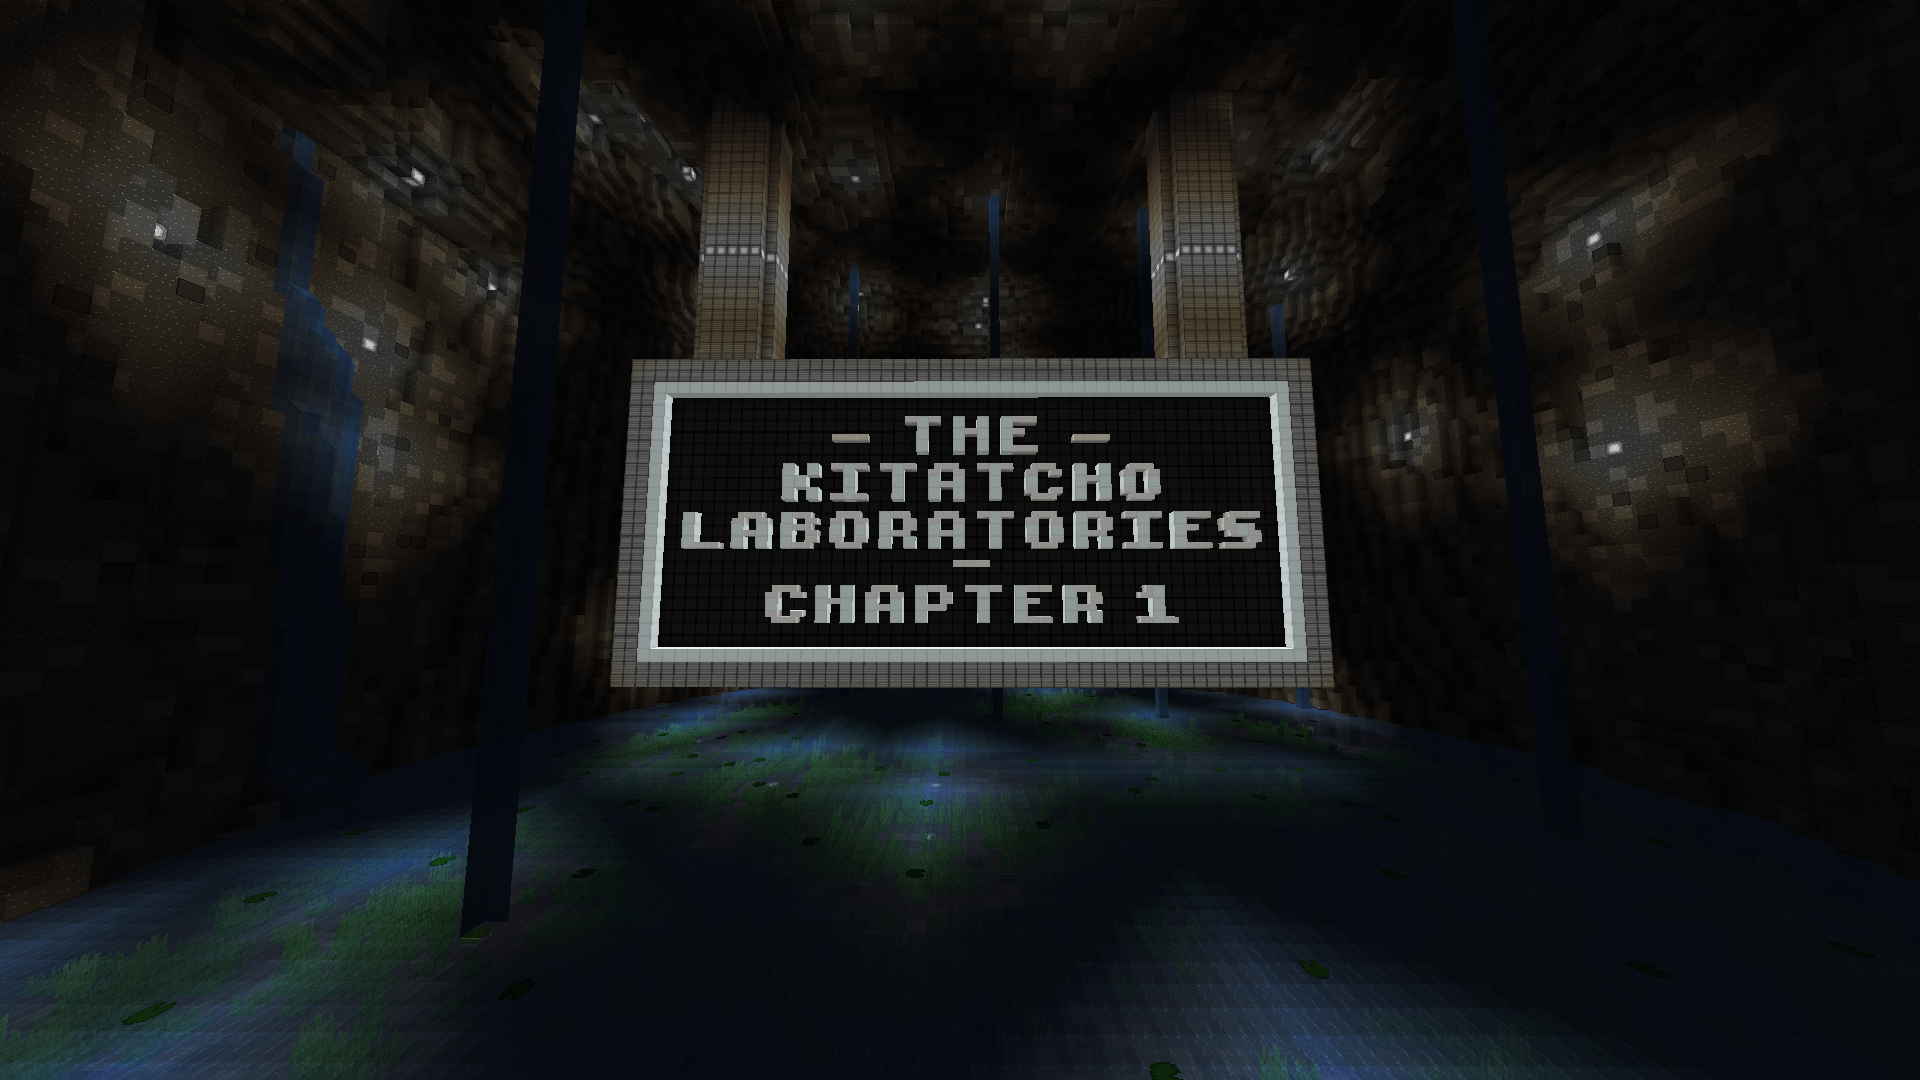 Download The Kitatcho Laboratories - Chapter 1 (Reboot) for Minecraft 1.16.3